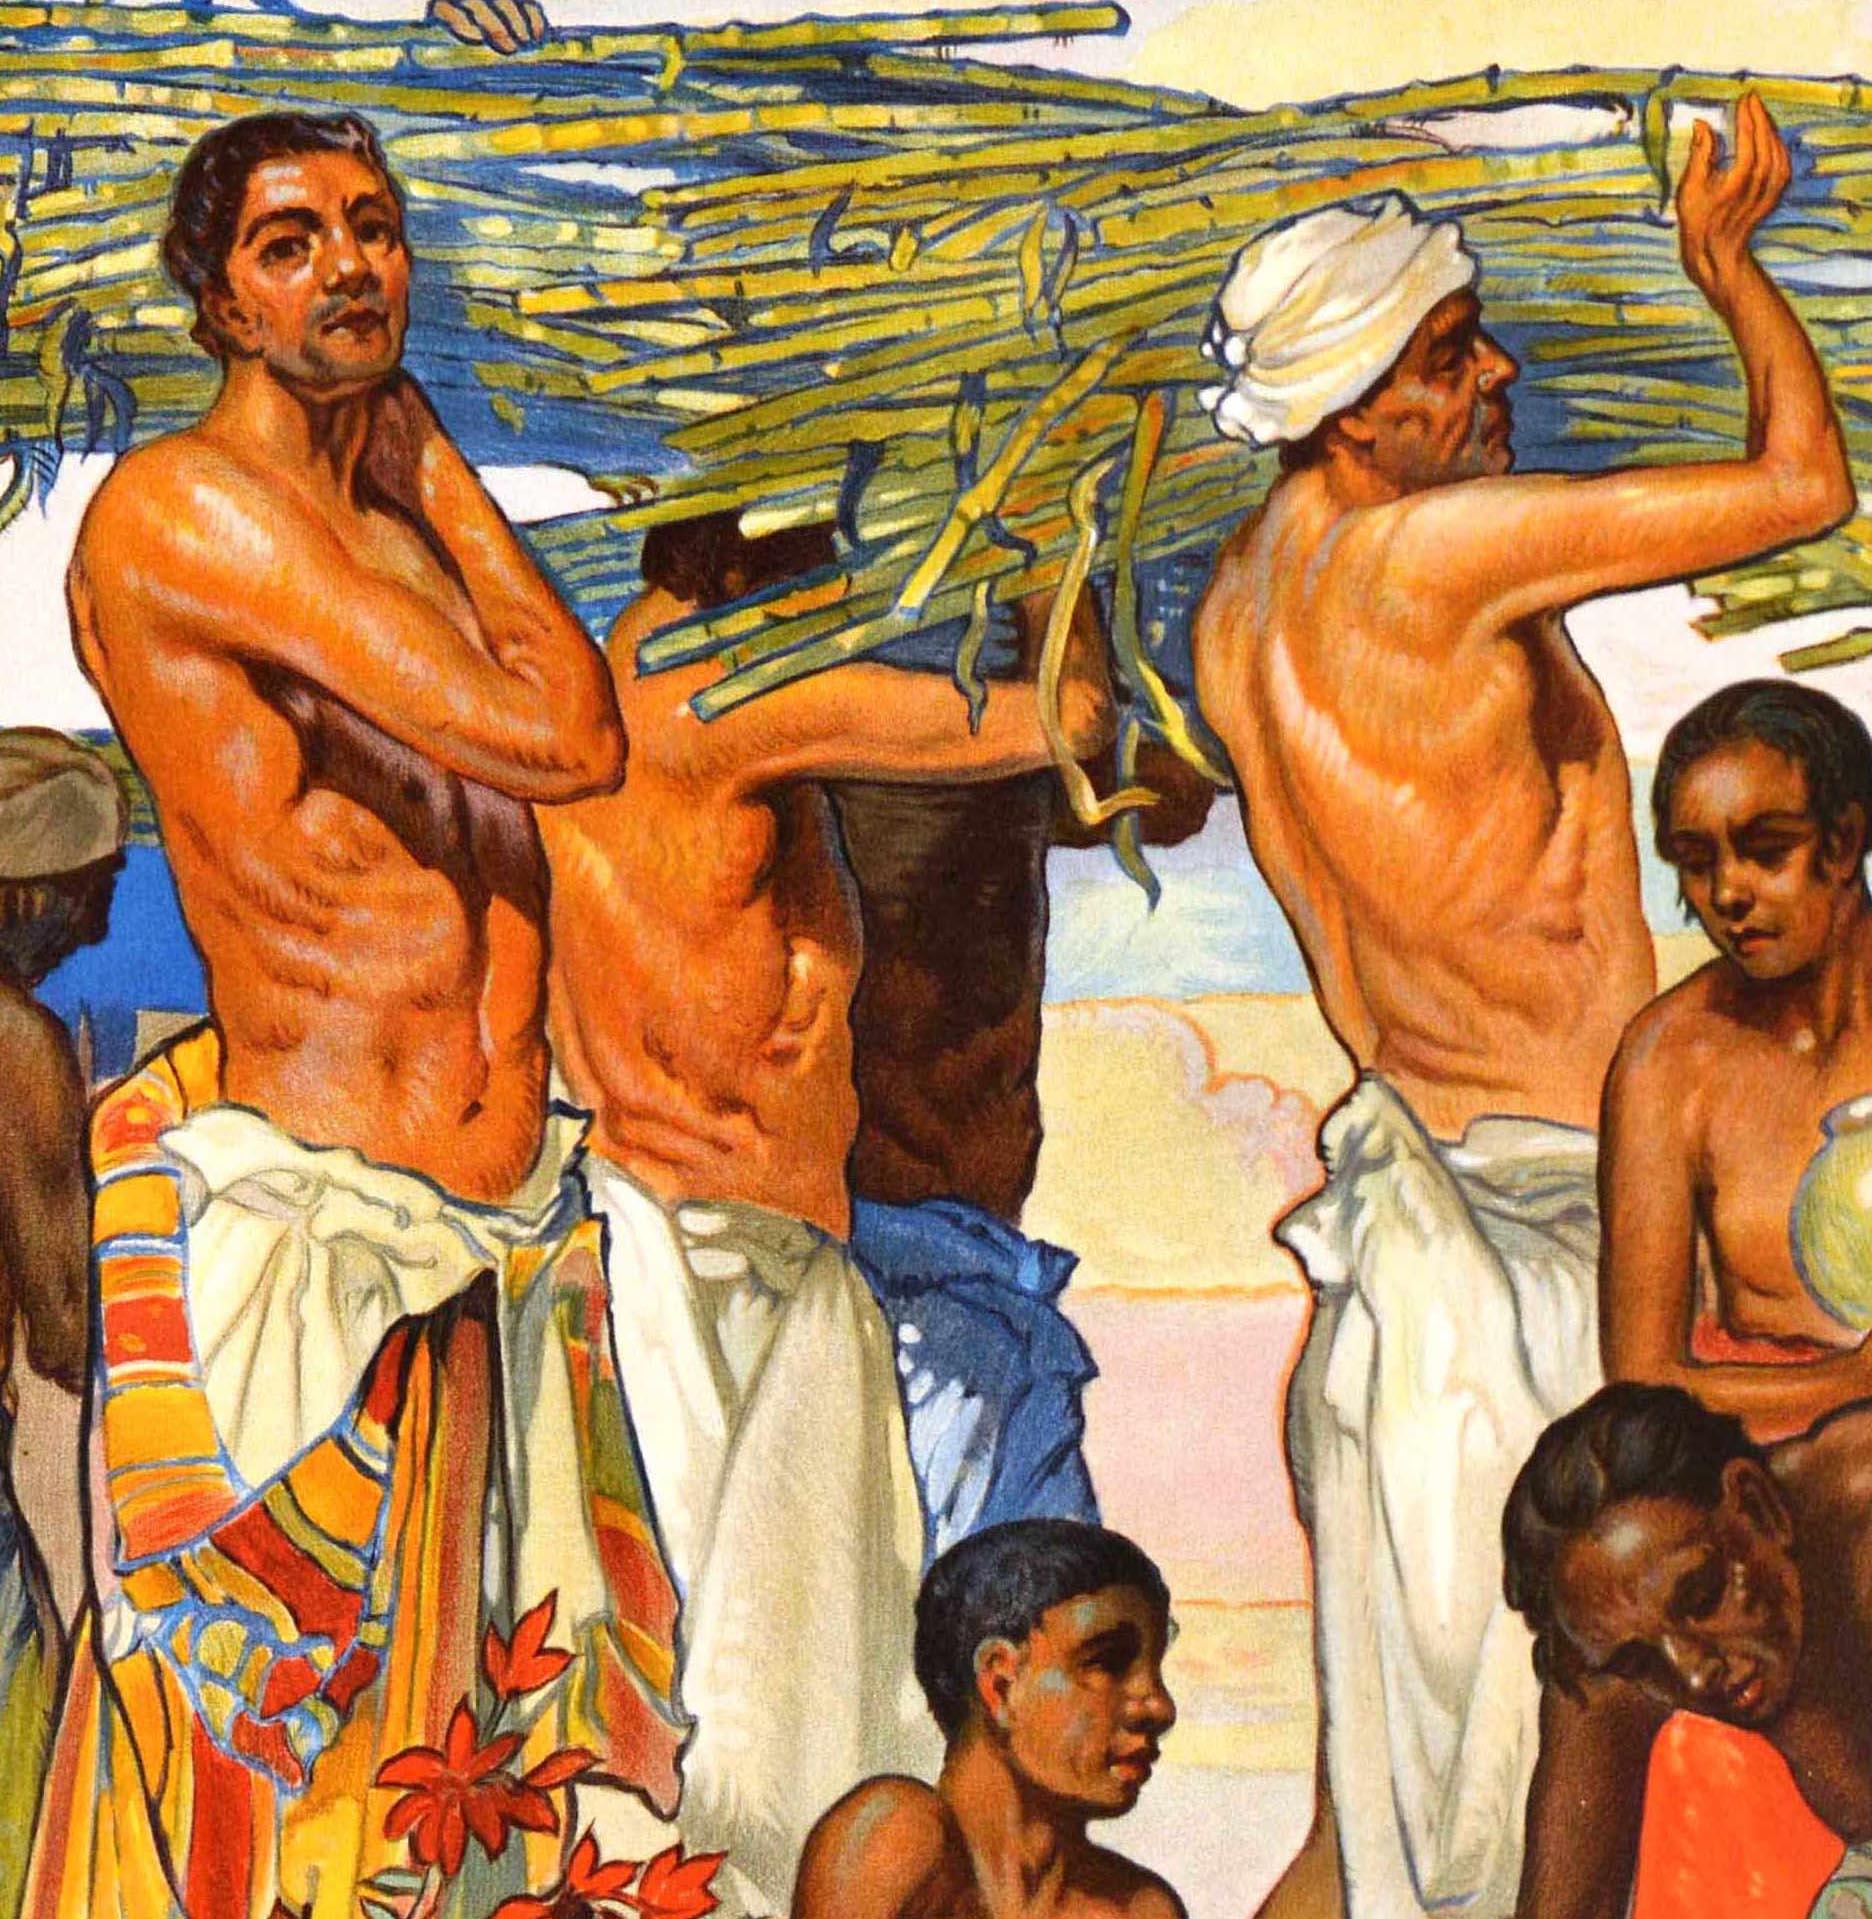 Original vintage poster issued by the Empire Marketing Board (EMB 1926-1933) as part of a campaign to promote trade within the British Empire featuring a colourful illustration by the British painter and graphic artist Elijah Albert Cox (1876-1955)